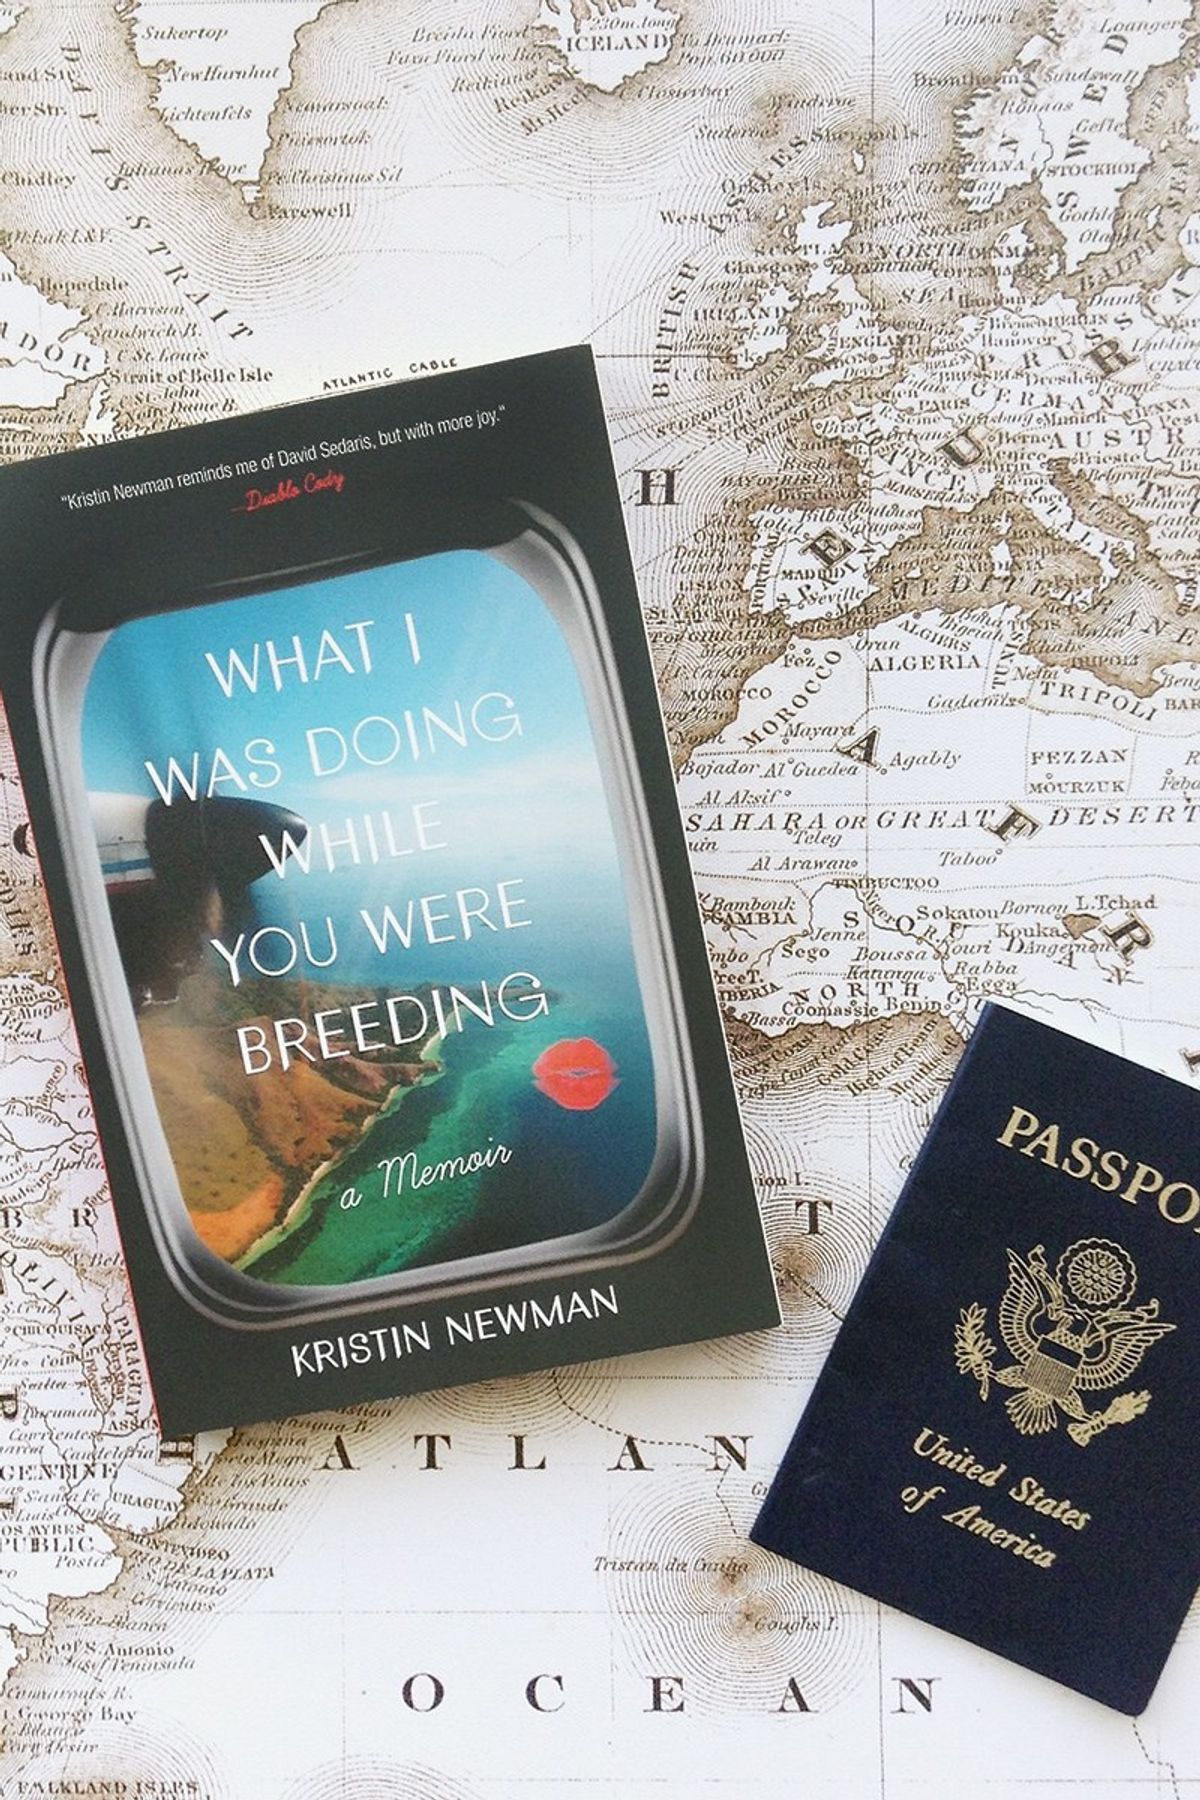 11 Reasons To Read "What I Was Doing While You Were Breeding"